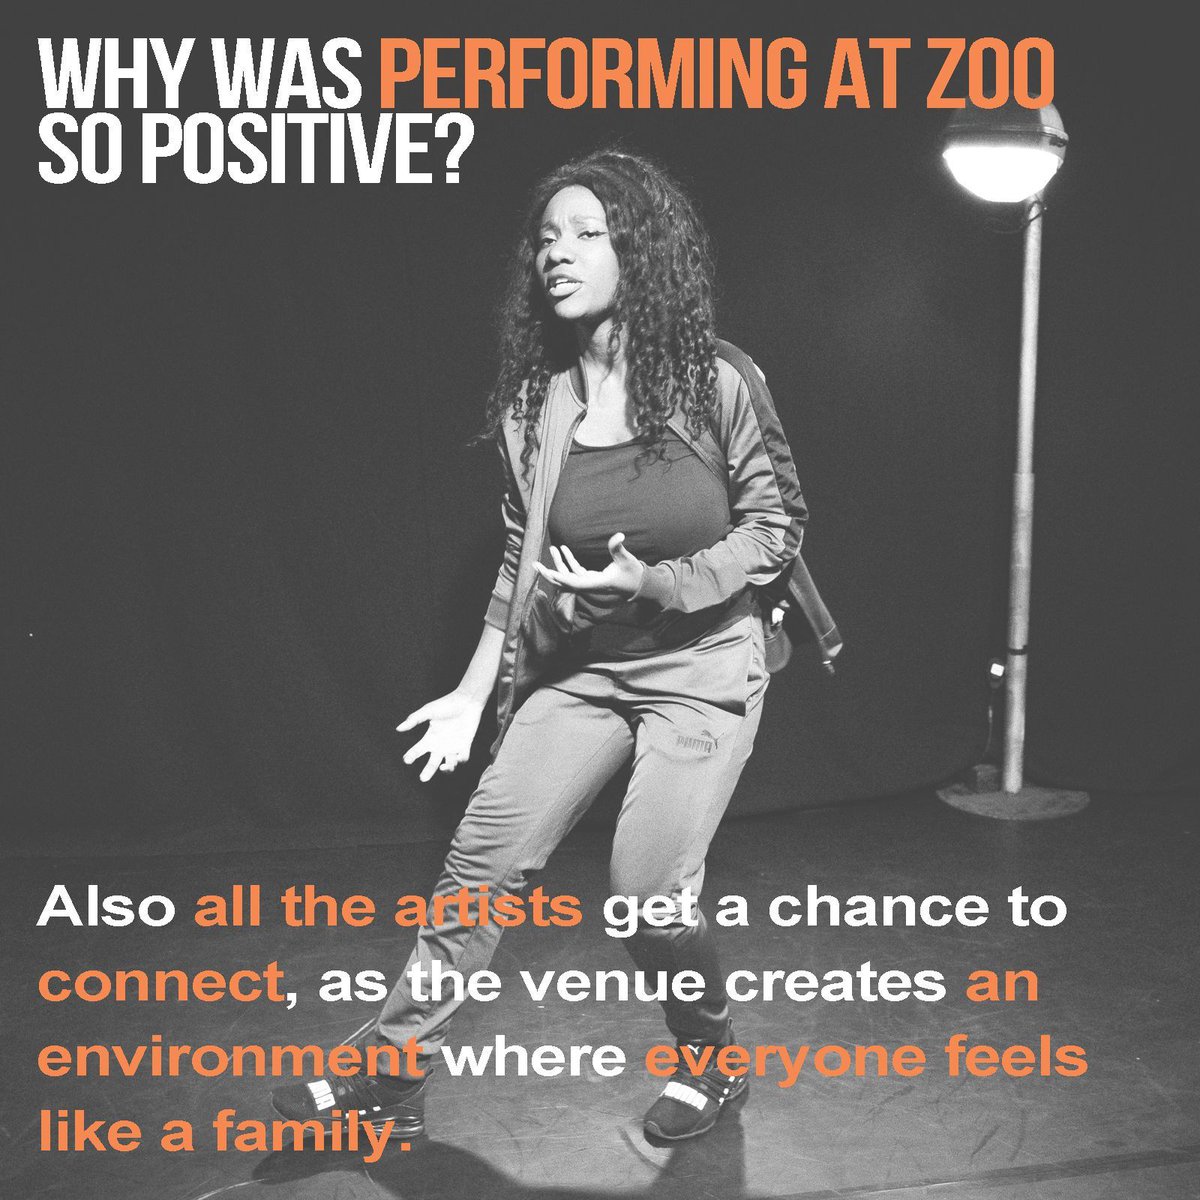 #MondayMotivation to send us your application to join us at #edfringe for #ZOO24 with outstanding #theatre #dance and #circus - here's Fringe First winner @womxnxarts @mandi93x on bringing Beasts (Why Girls Shouldn't Fear The Dark) to ZOO Playground. More Info & Apply via LIB